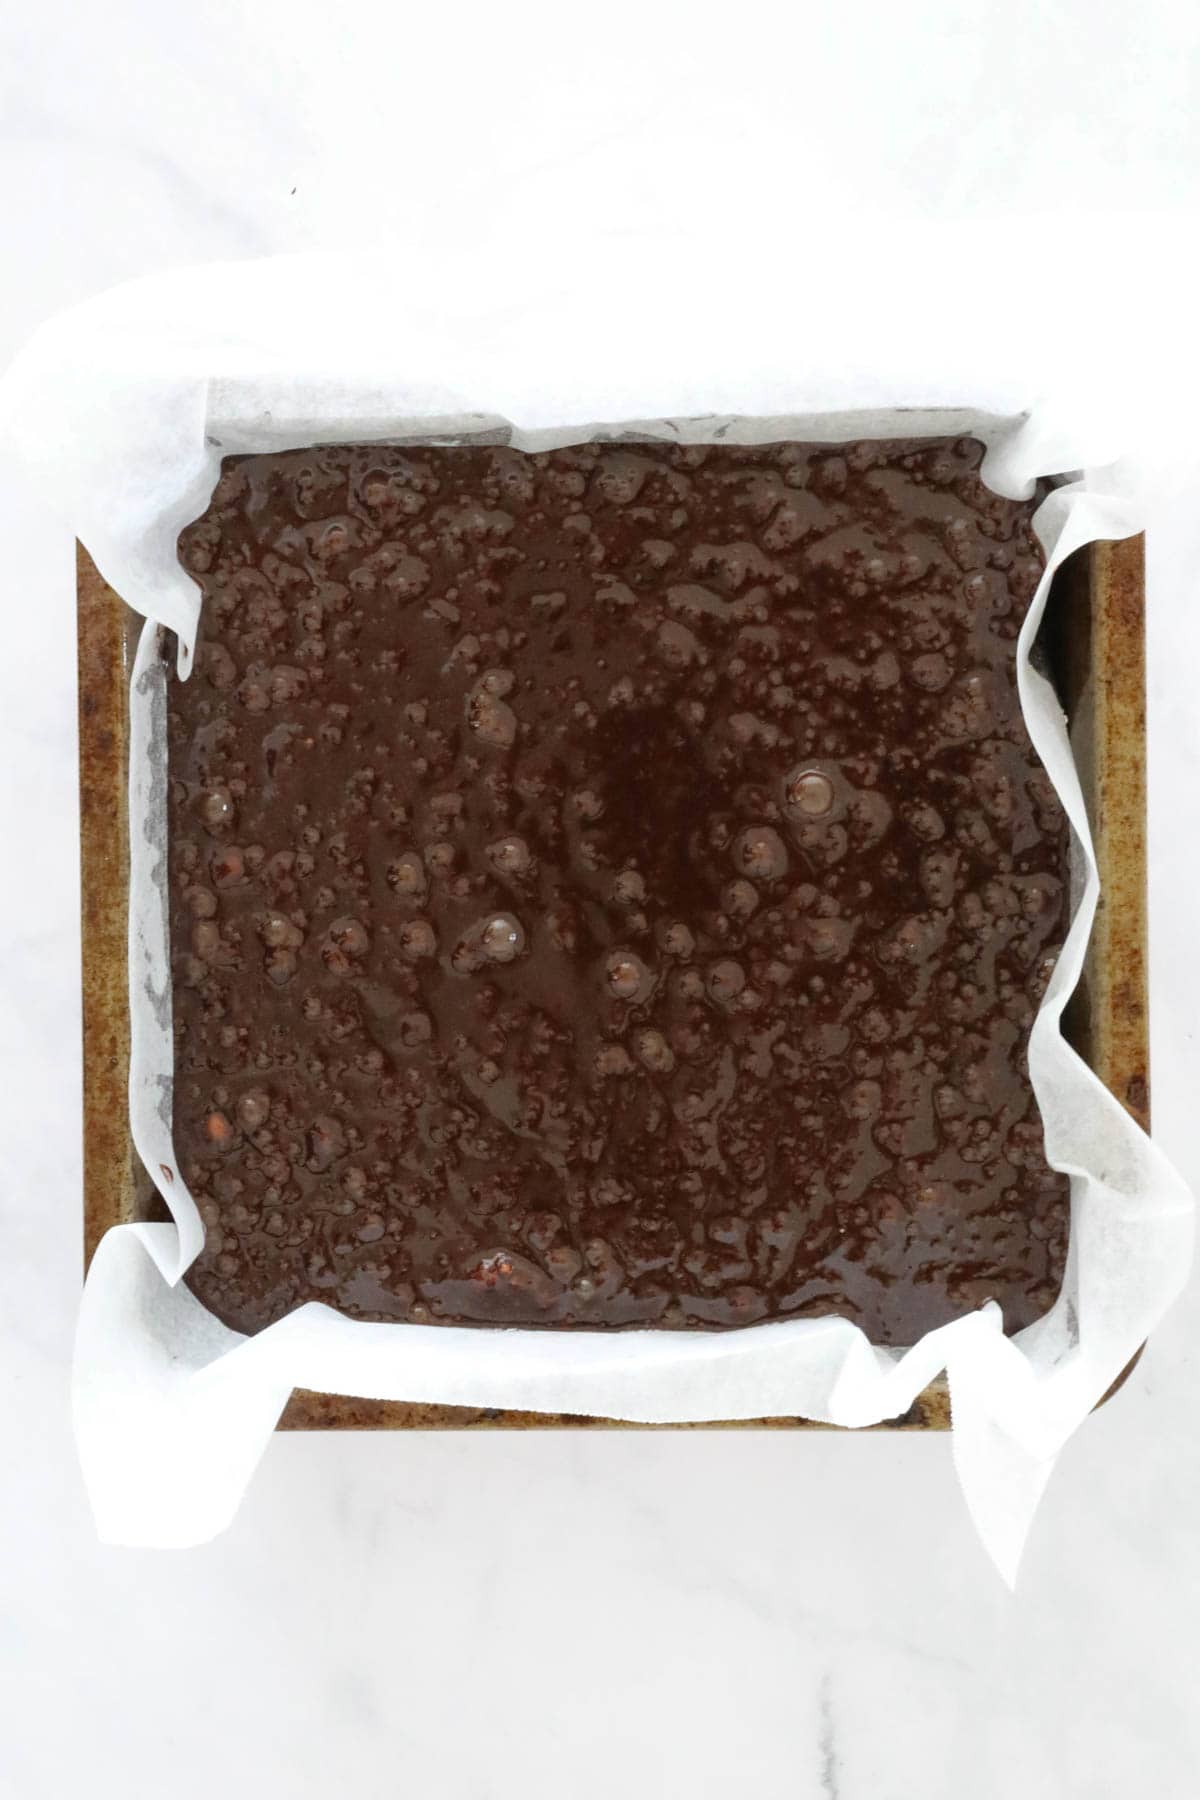 Brownie batter poured into a square baking tin lined with baking paper.